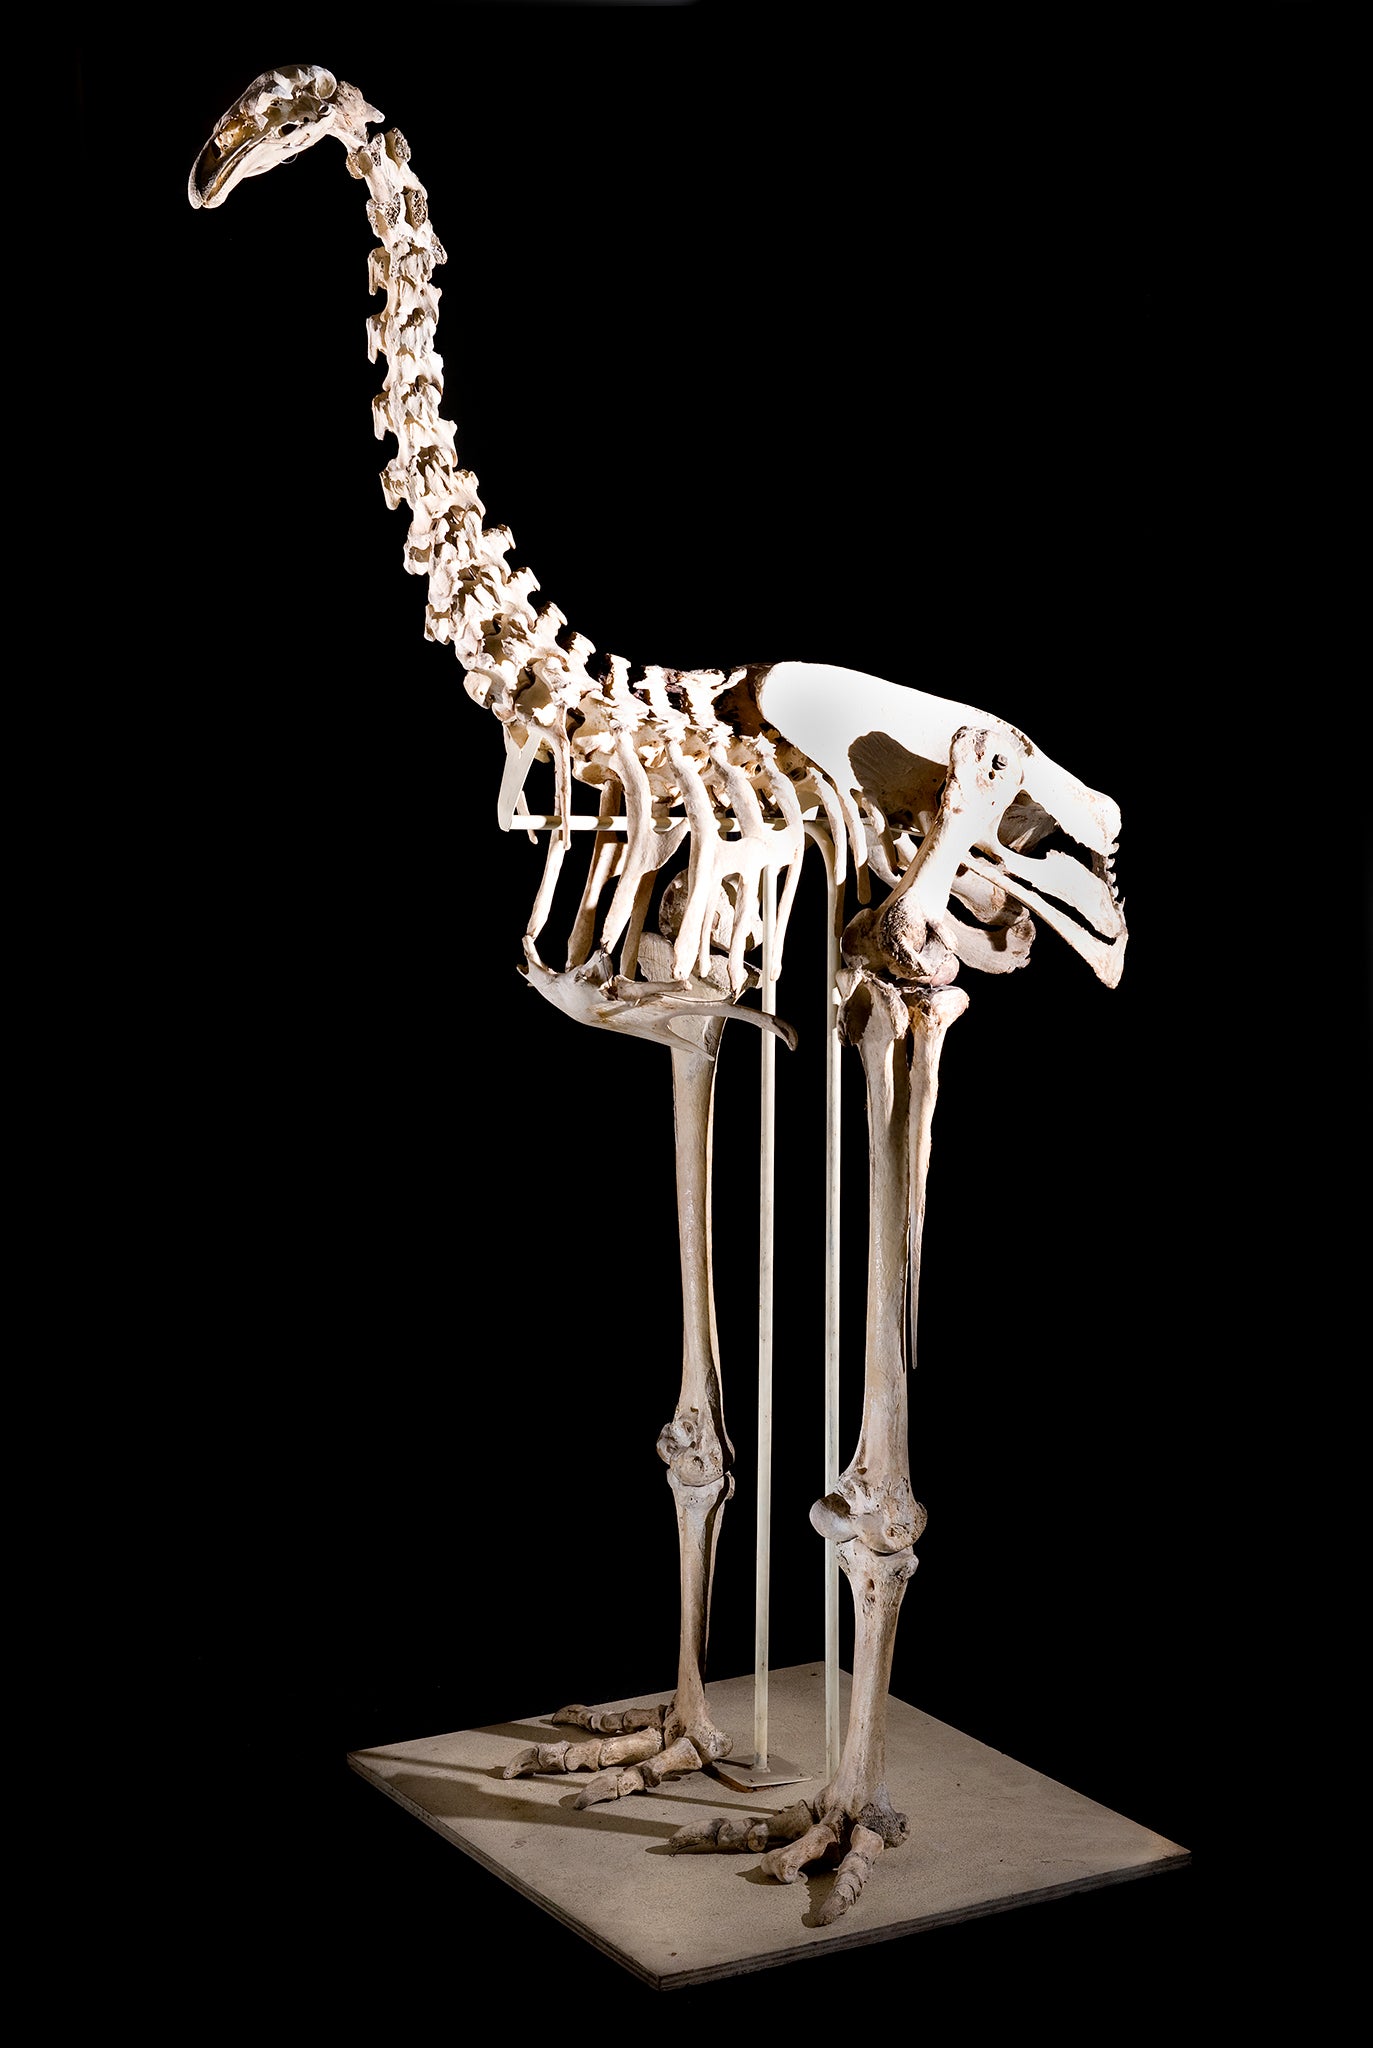 A skeleton of a giant moa found in New Zealand